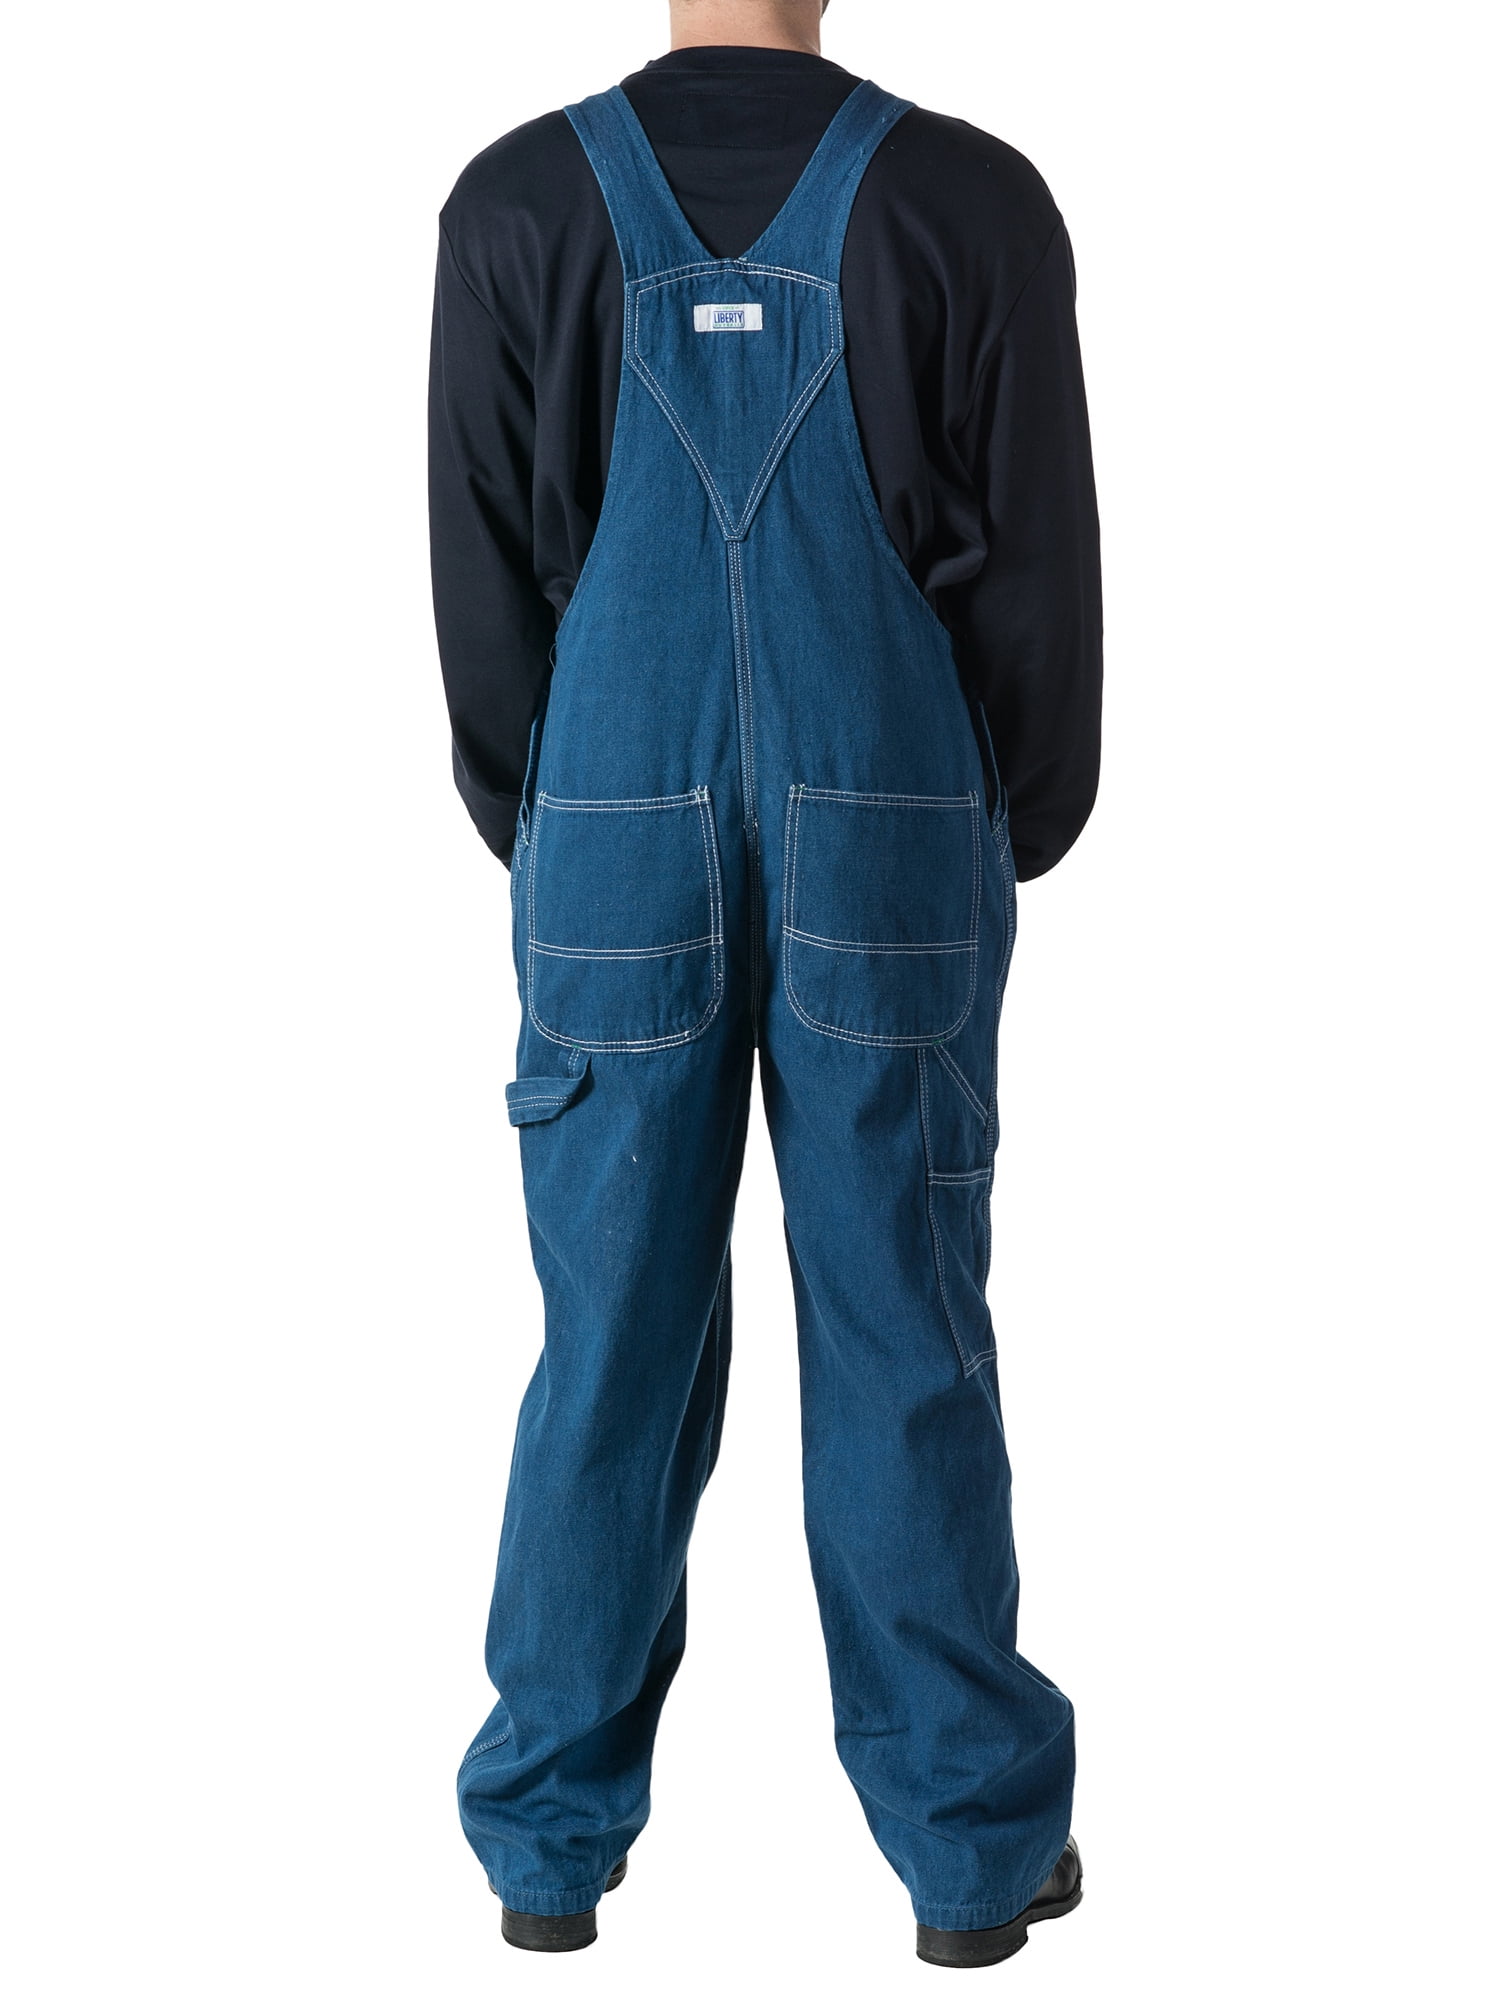 Judy Blue Overalls Size Chart